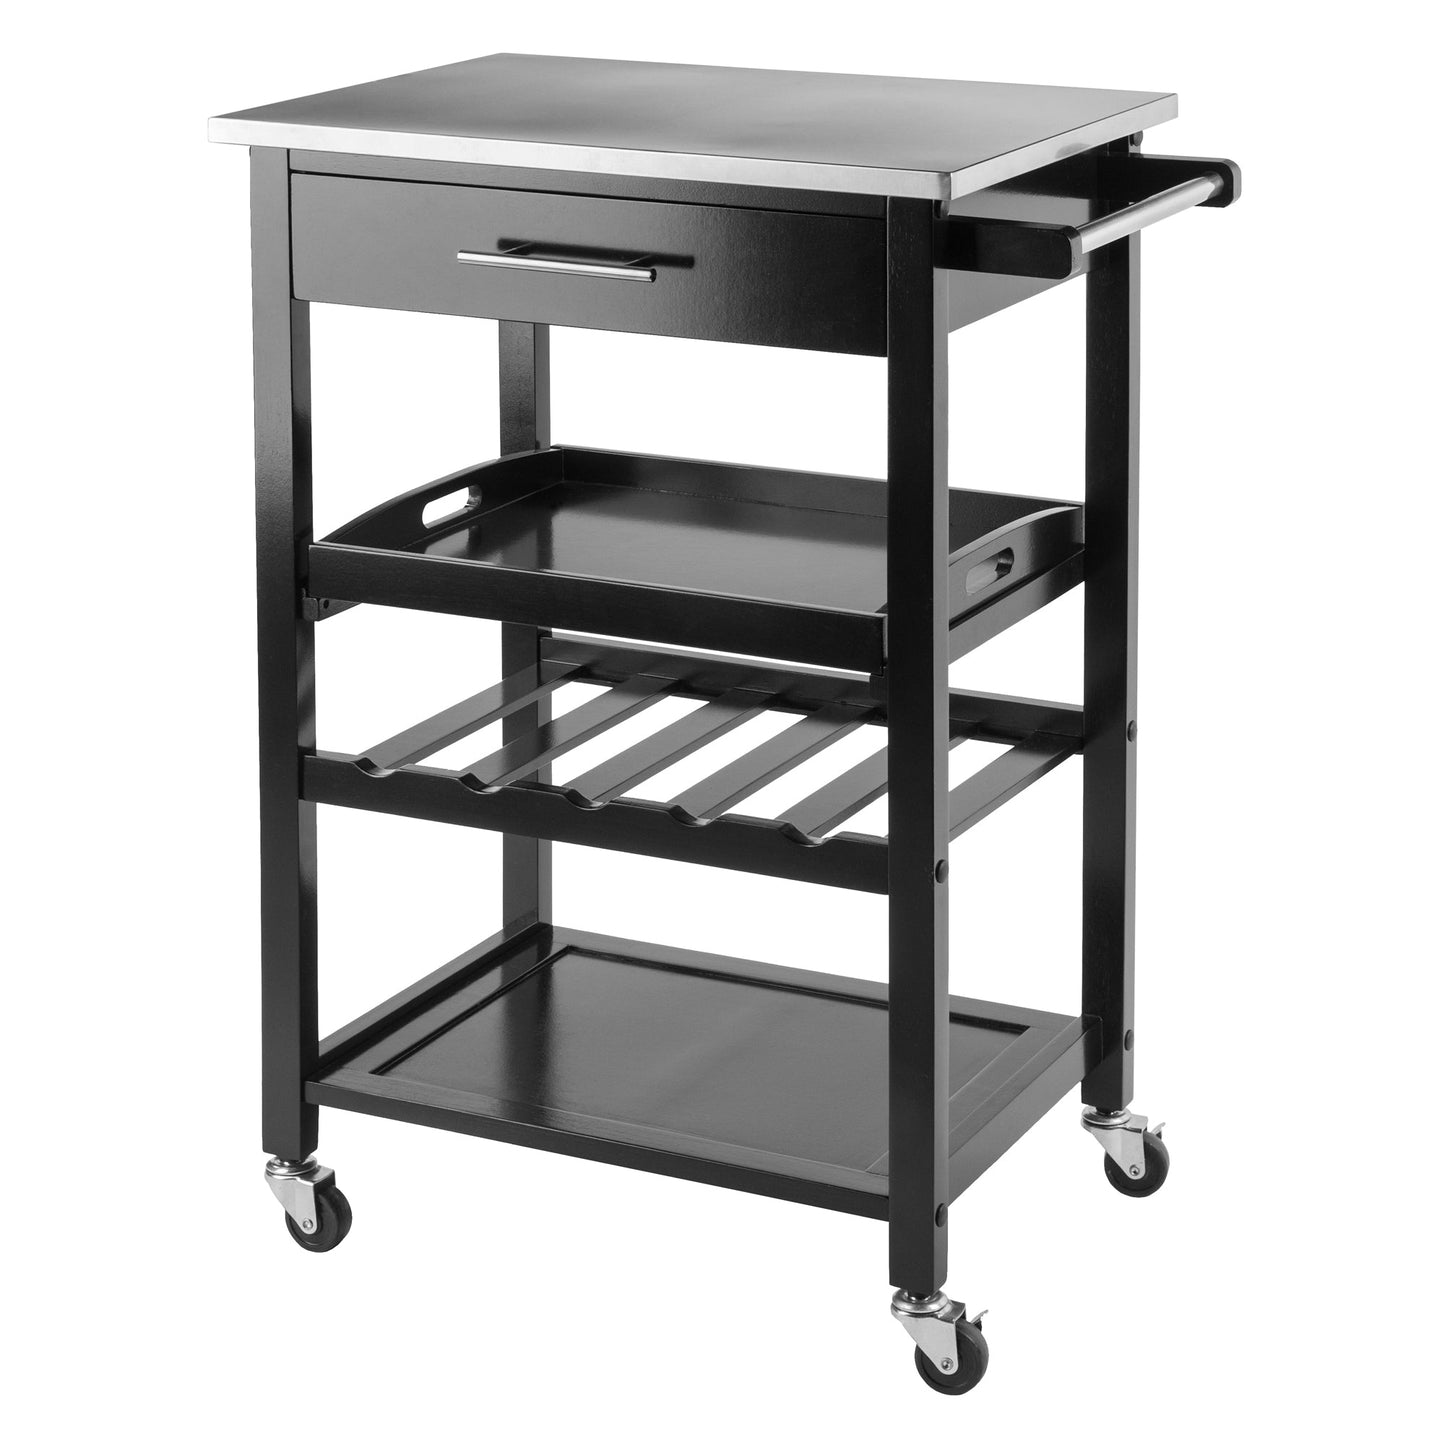 Anthony Utility Kitchen Cart, Stainless Steel Top, Black - The Bar Design